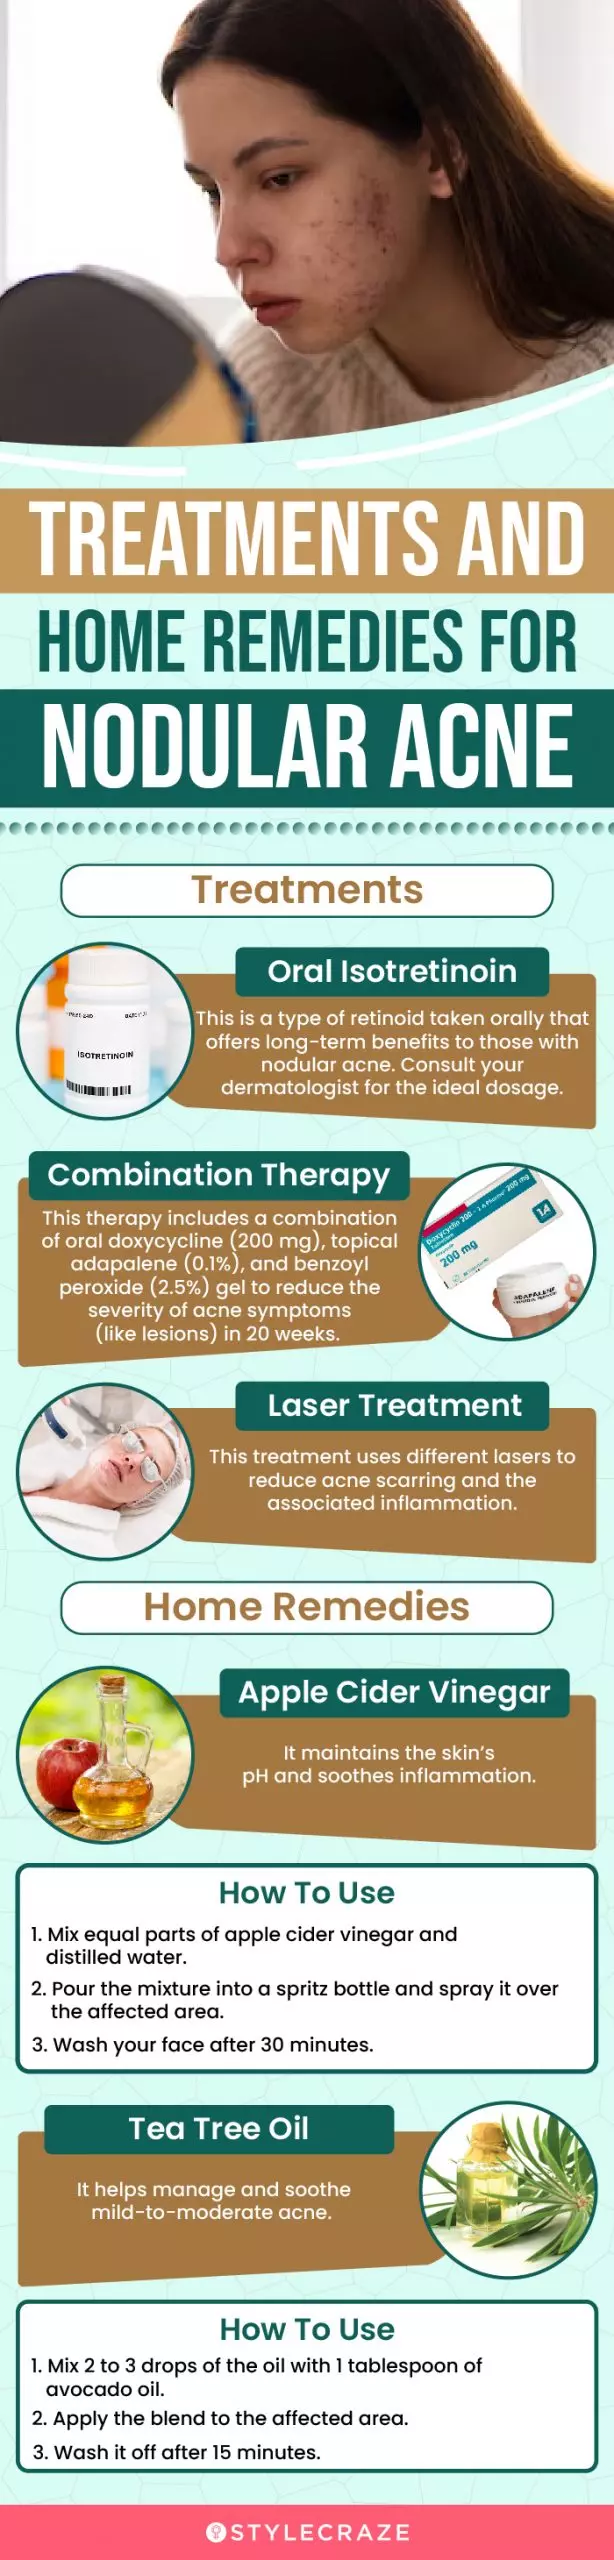 treatments and home remedies for nodular acne (infographic)